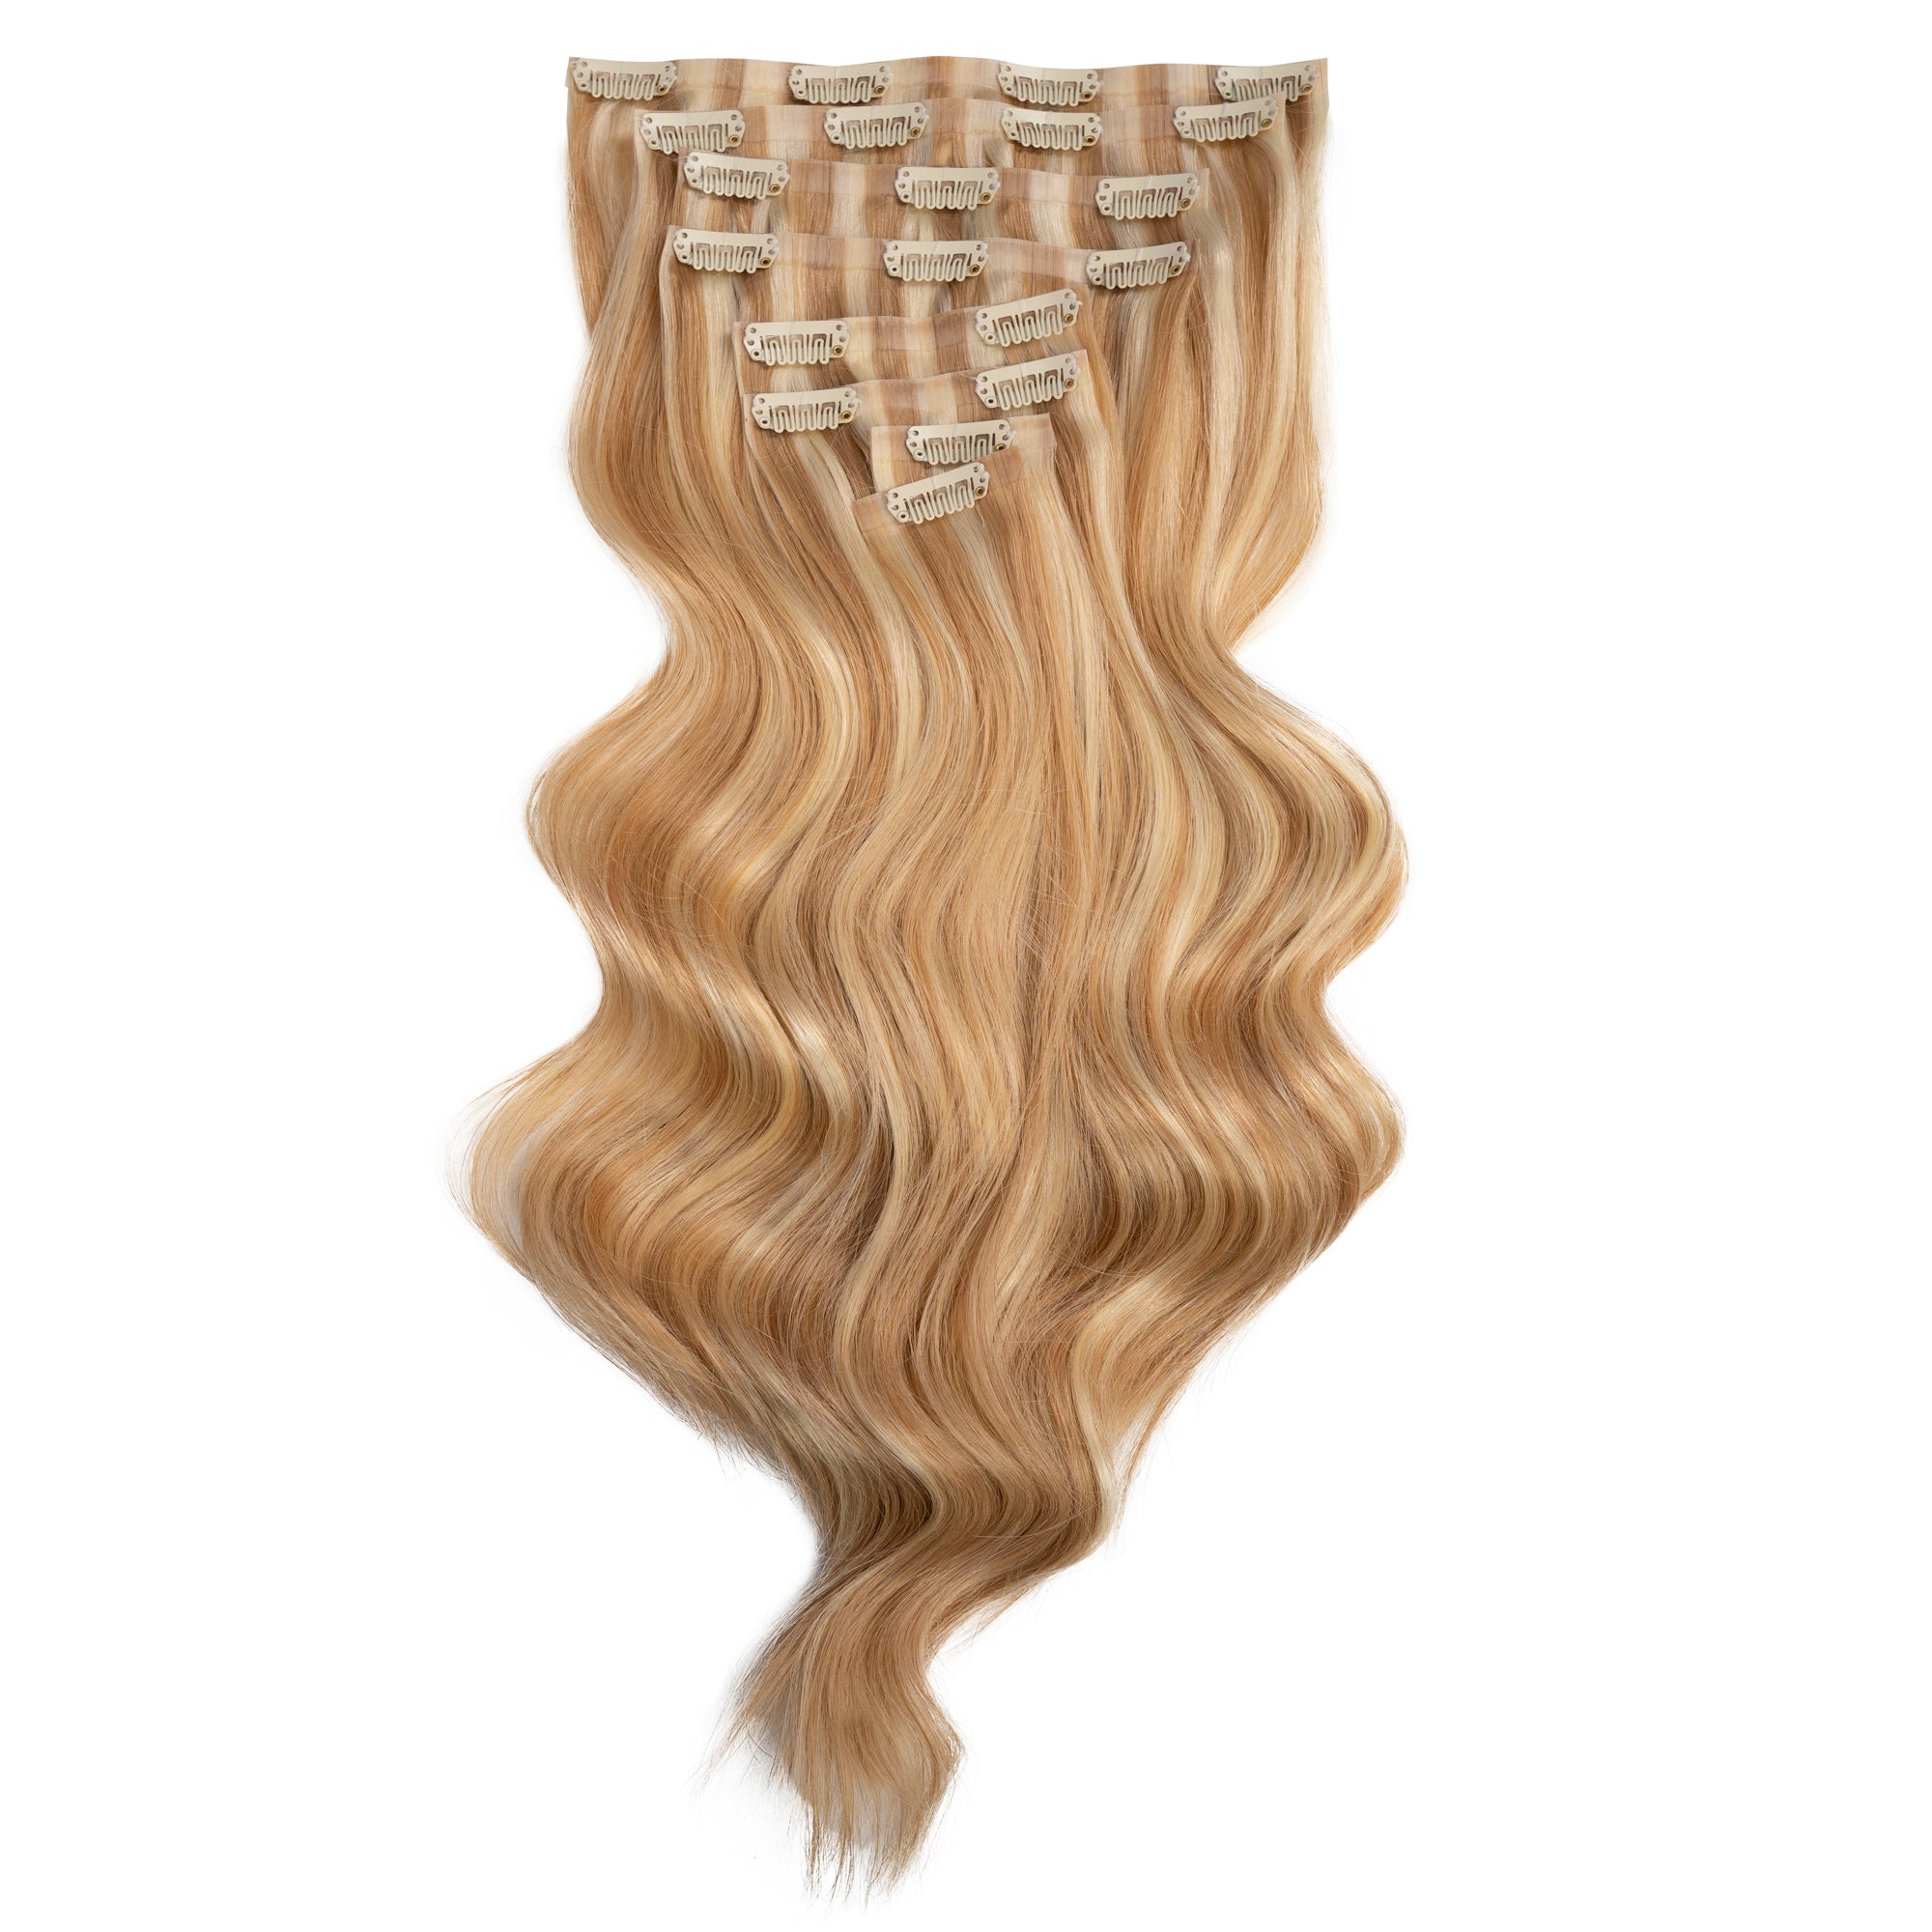 Empress Deluxe Clip-in Hair Extensions 18" Colour P27 613 - Maneology Hair Extensions